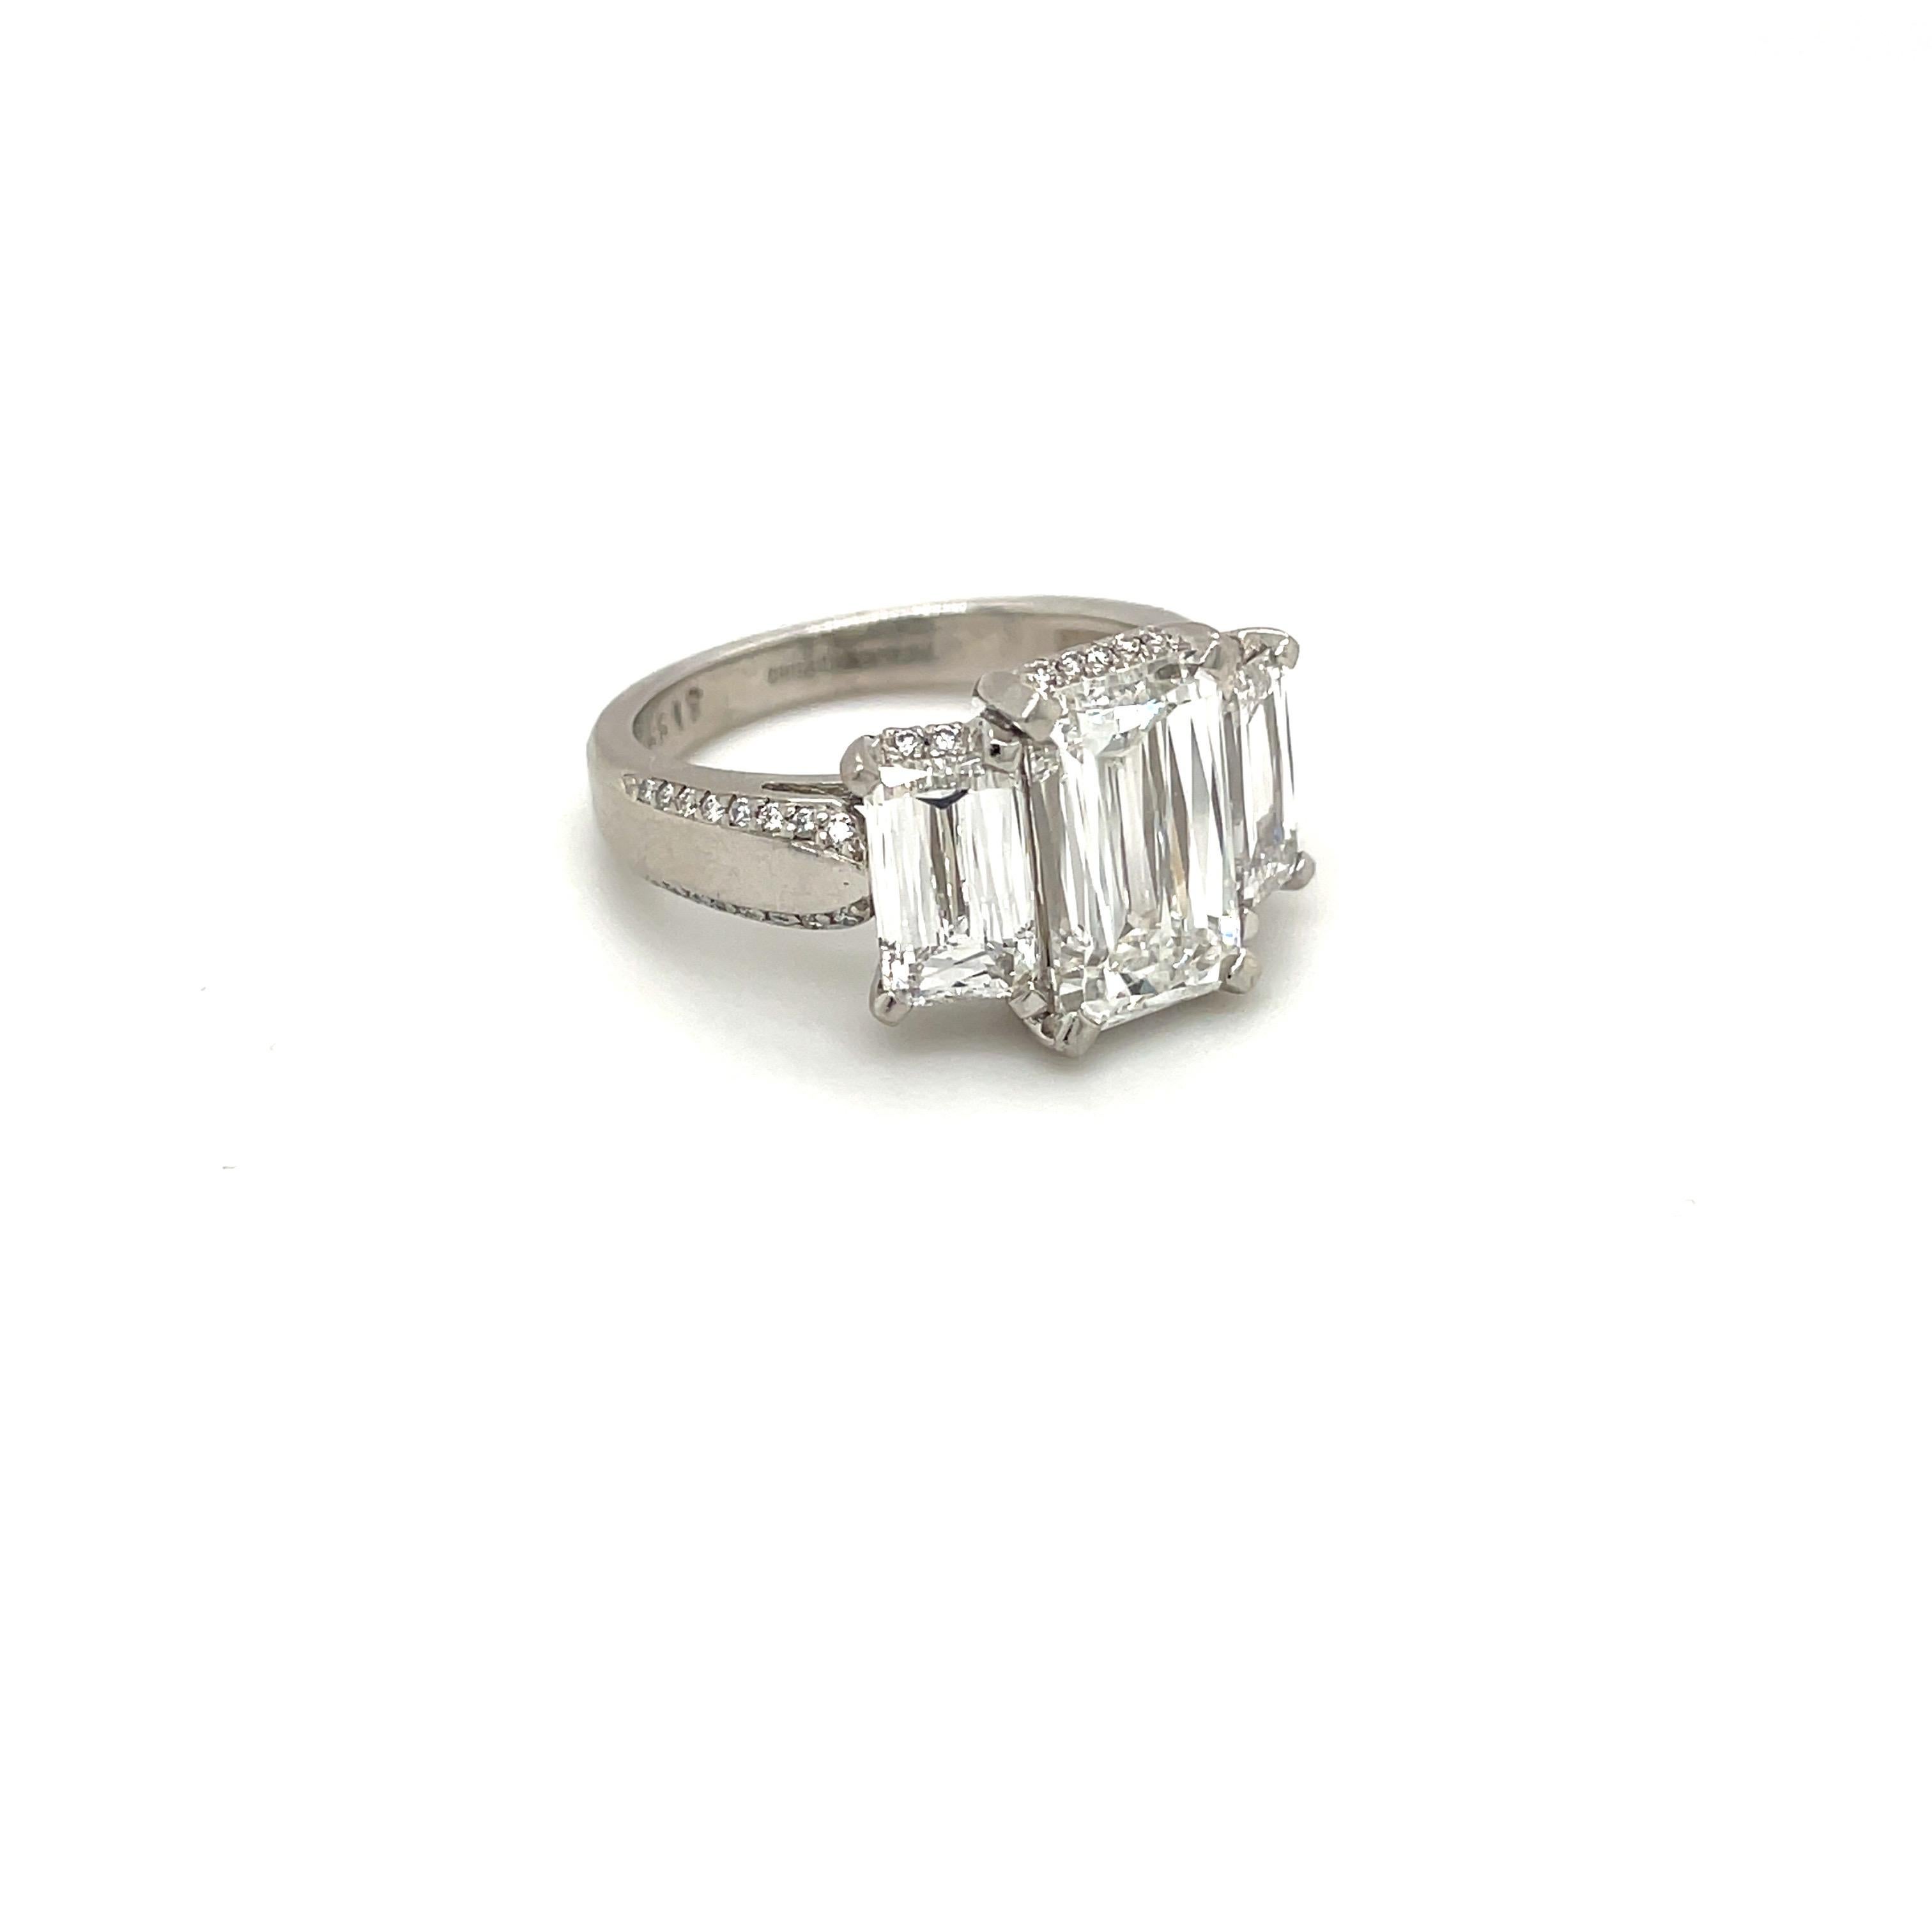 The Crisscut® Emerald diamond has an elongated shape with cut corners that emphasize
clarity. The Crisscut diamond has patented crisscross faceting. The elegance and beauty of a classic Emerald Cut, with unmatched brilliance.
Platinum mounting. The